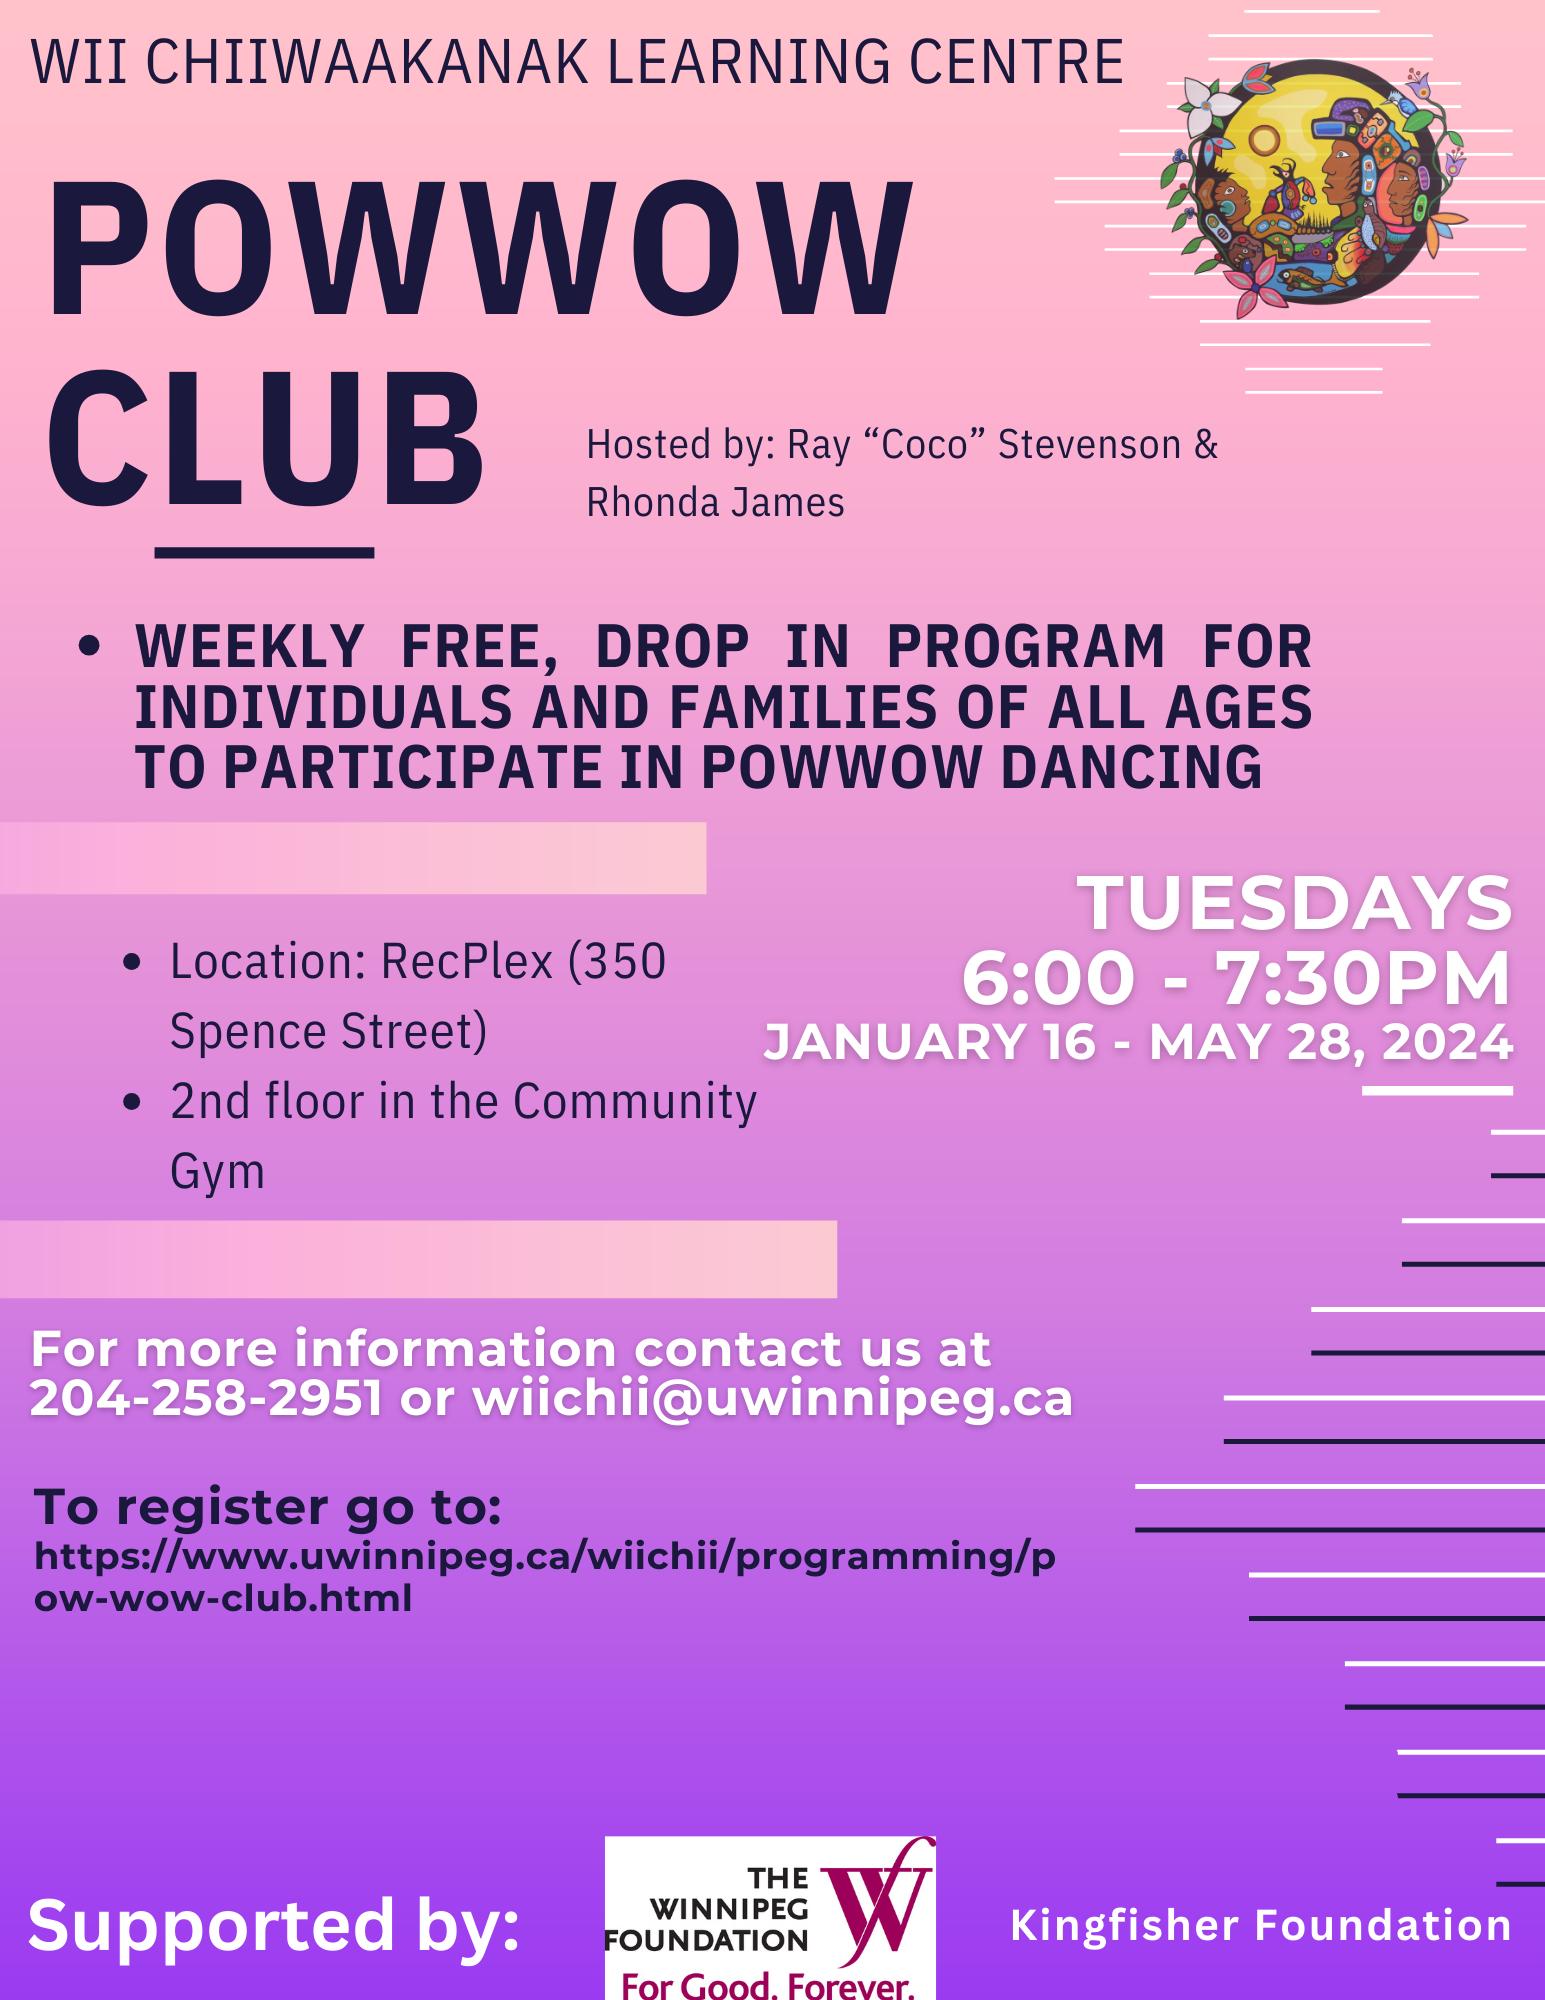 Image shows a program poster for Powwow Club with dates as noted above. Contact info for Julie Hiebert is also listed as j.hiebert@uwinnipeg.ca